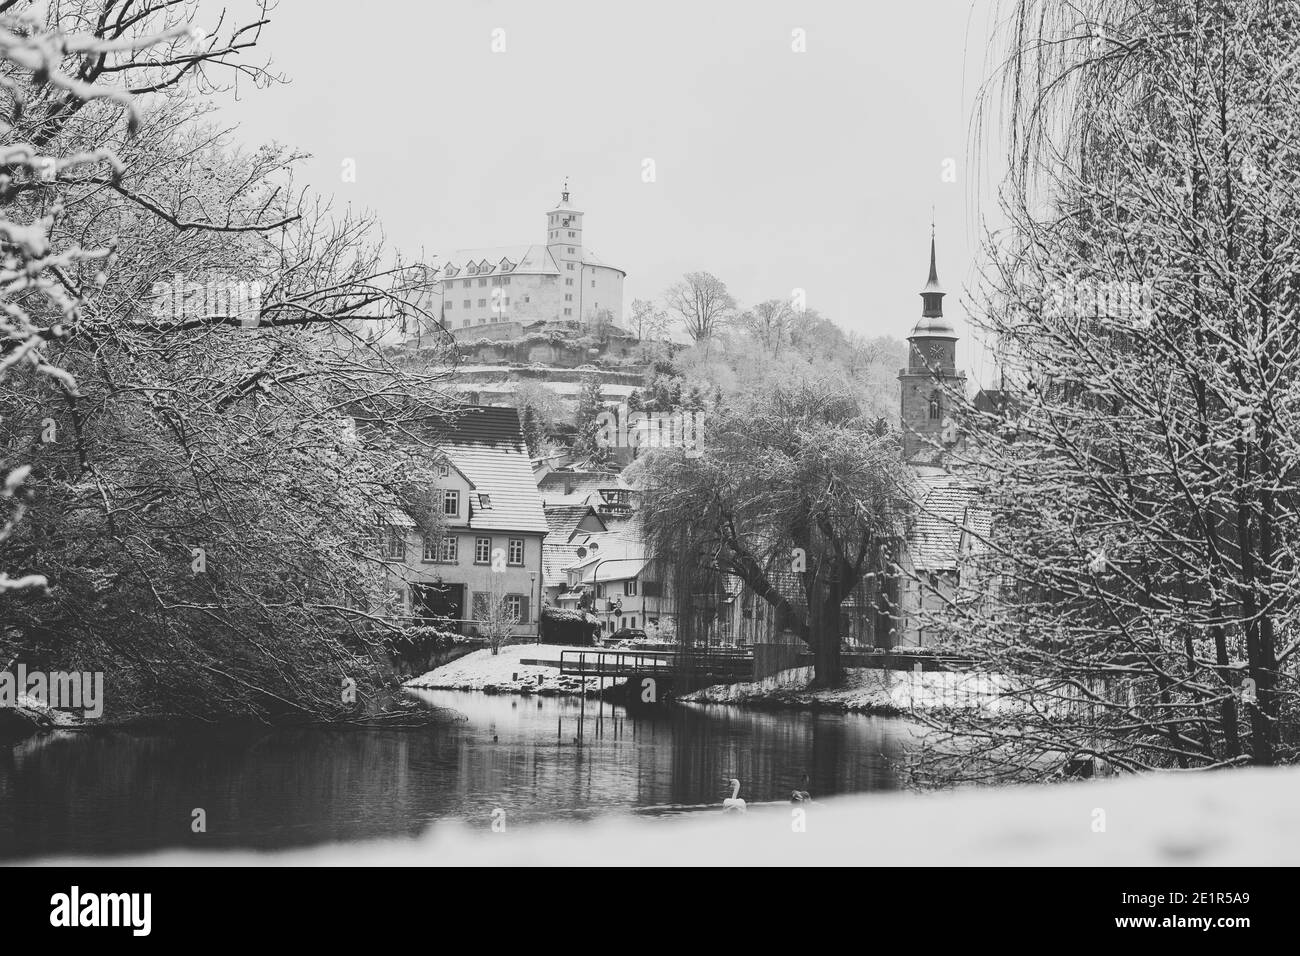 Schloss Kaltenstein in mid-winter, dressed in snow edited in black and white Stock Photo